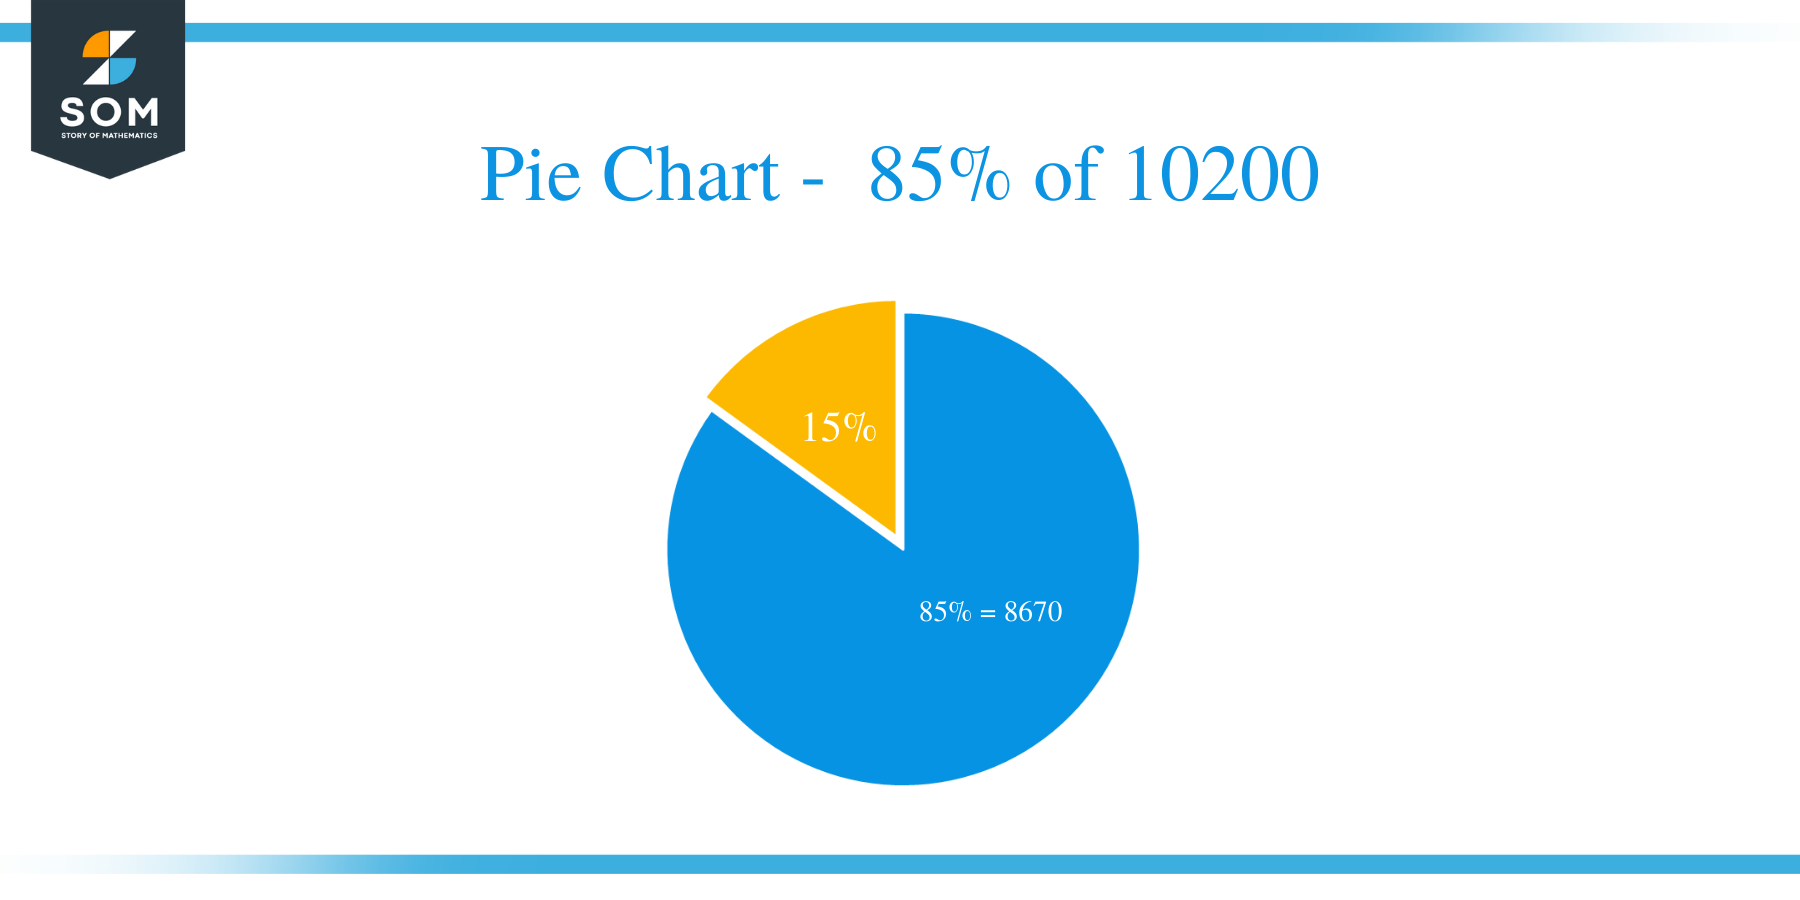 pie chart of 85 percent of 10200